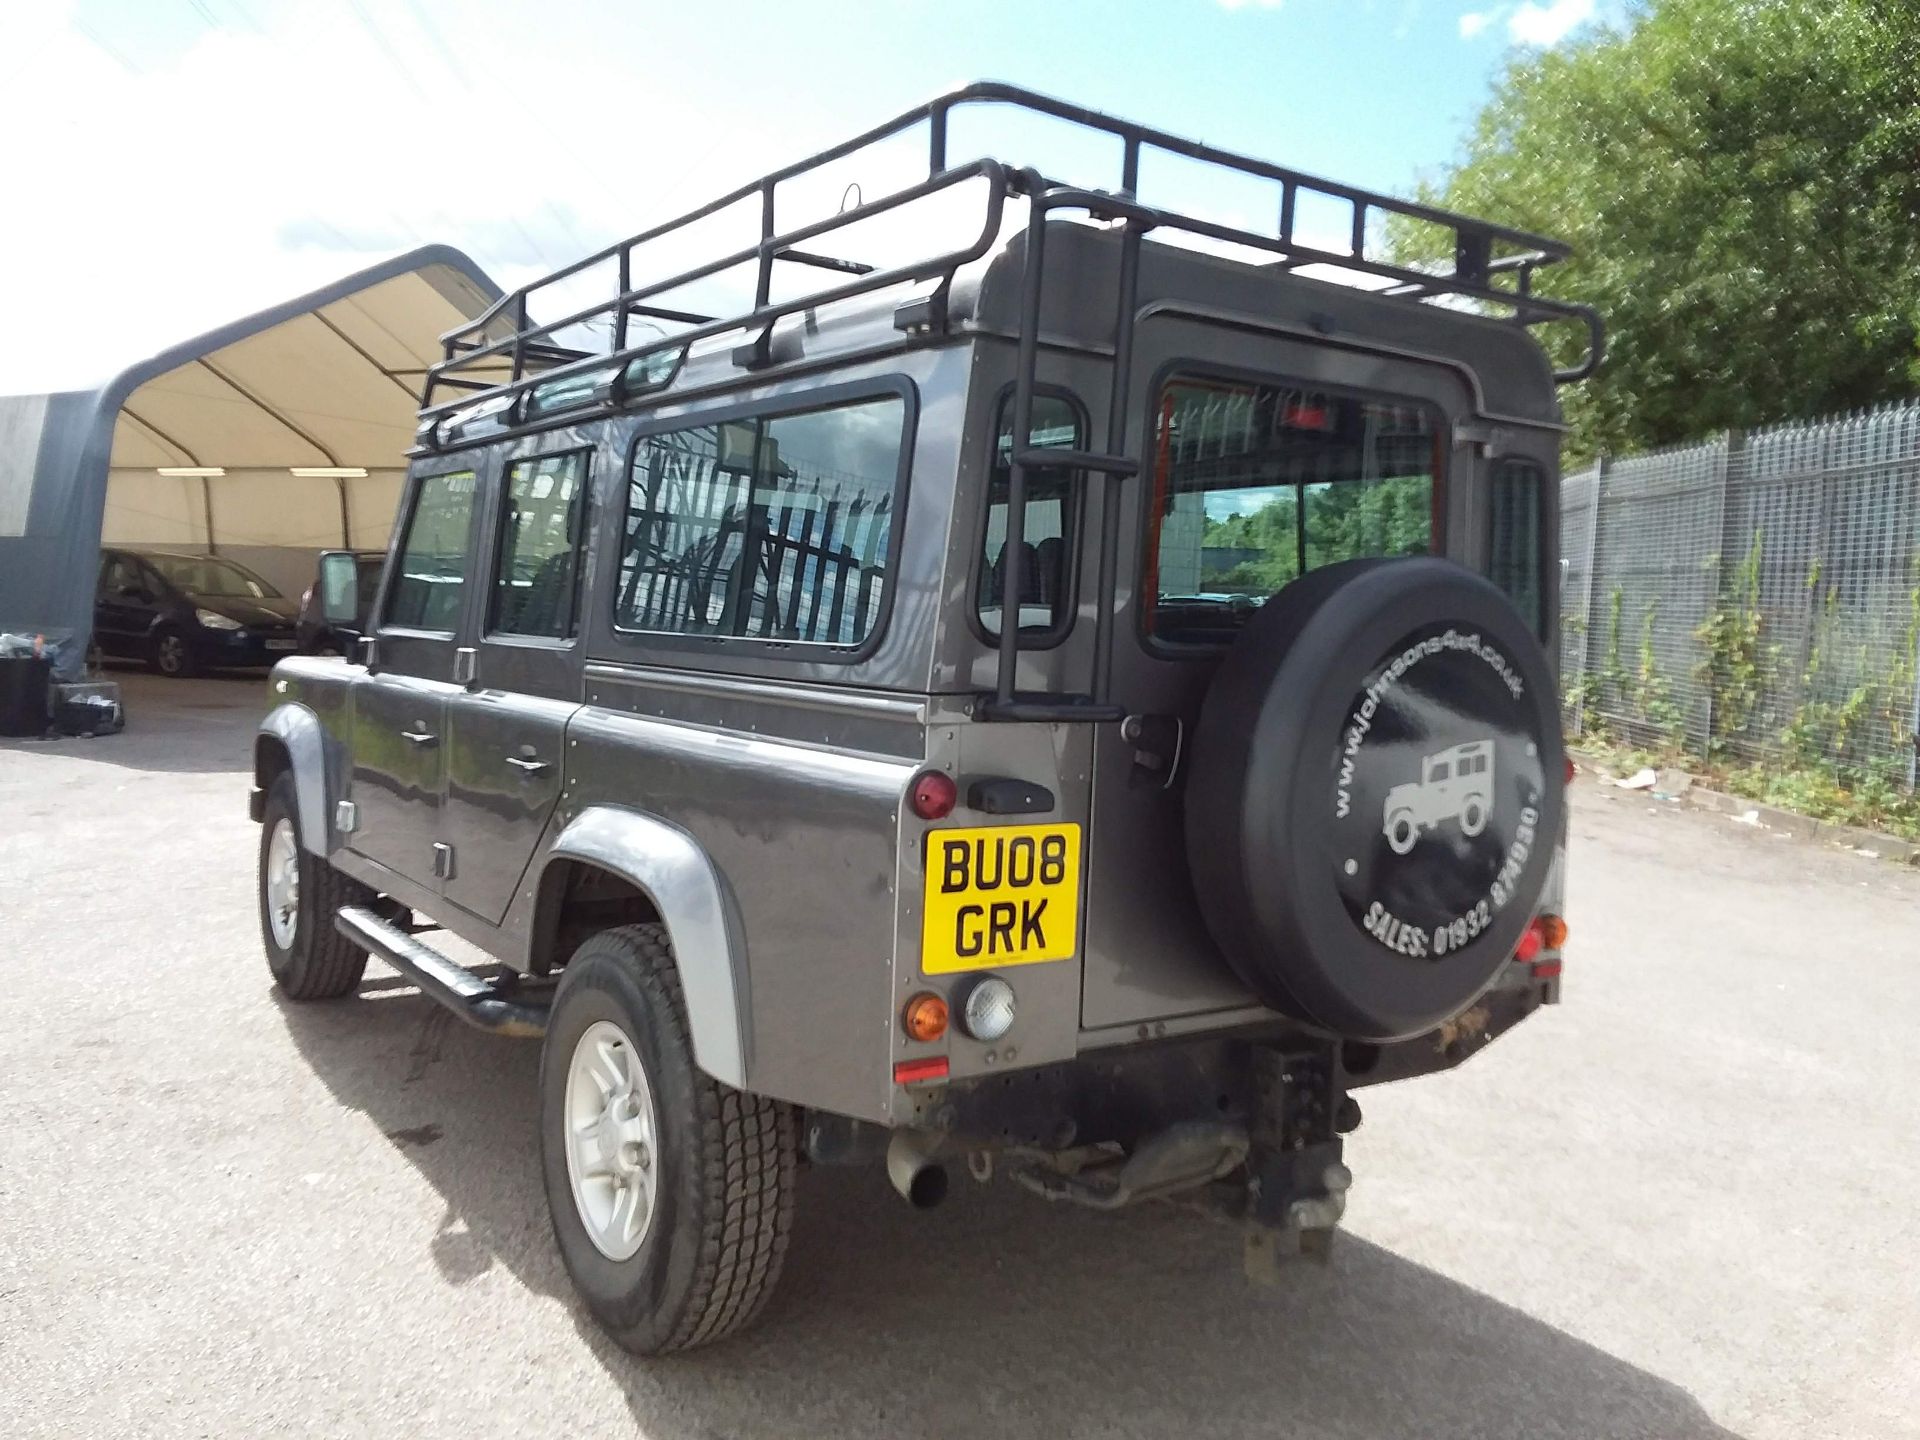 2008/08 REG LAND ROVER DEFENDER 110 XS LWB STATION WAGON 2.4 DIESEL, 7 SEATER, AIR CON *NO VAT* - Image 4 of 10